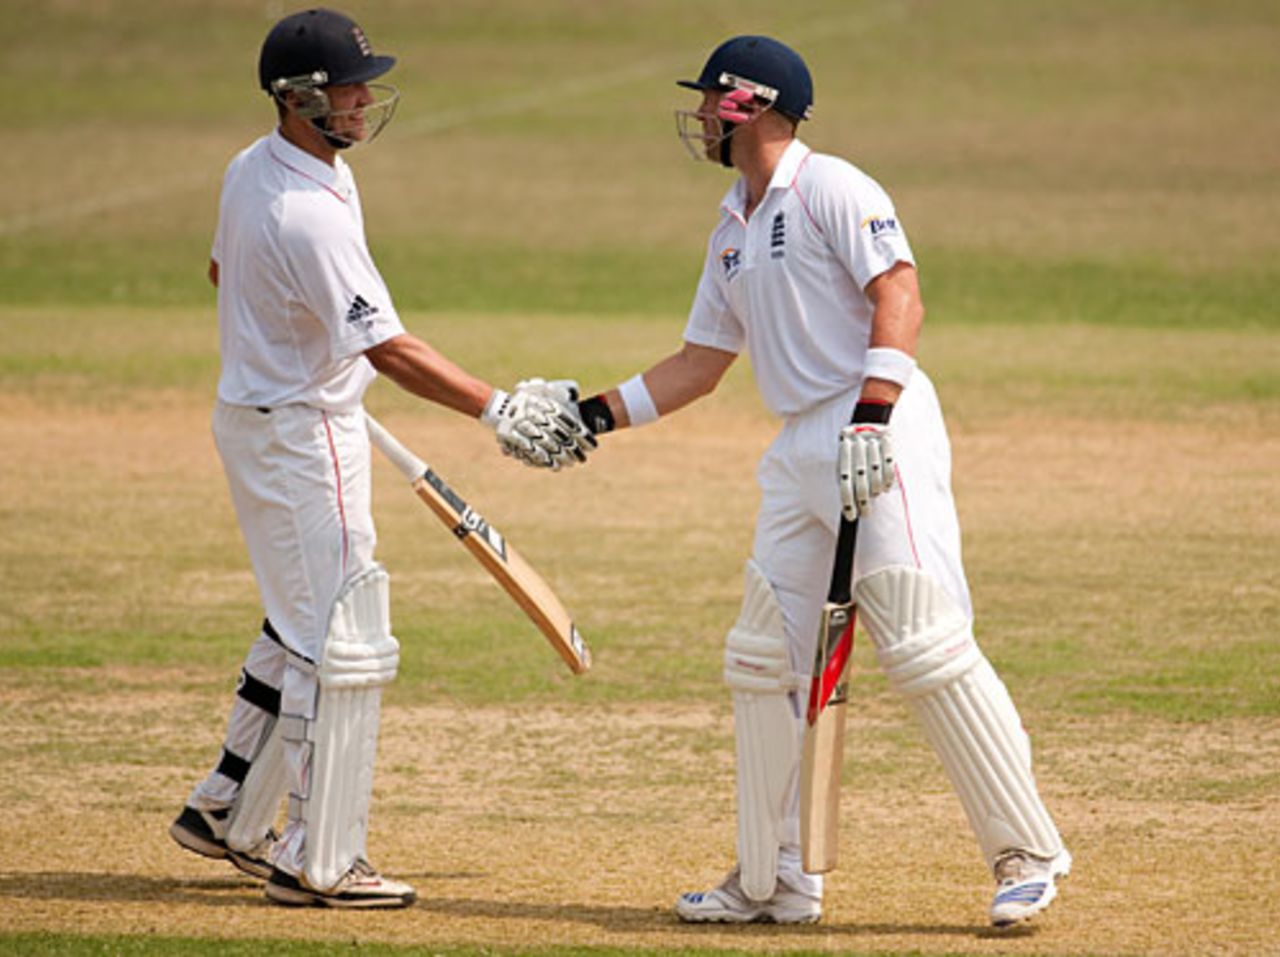 Jonathan Trott is congratulated by Matt Prior for reaching his hundred, Bangladesh A v England XI, tour match, Chittagong, 2nd day, March 8, 2010